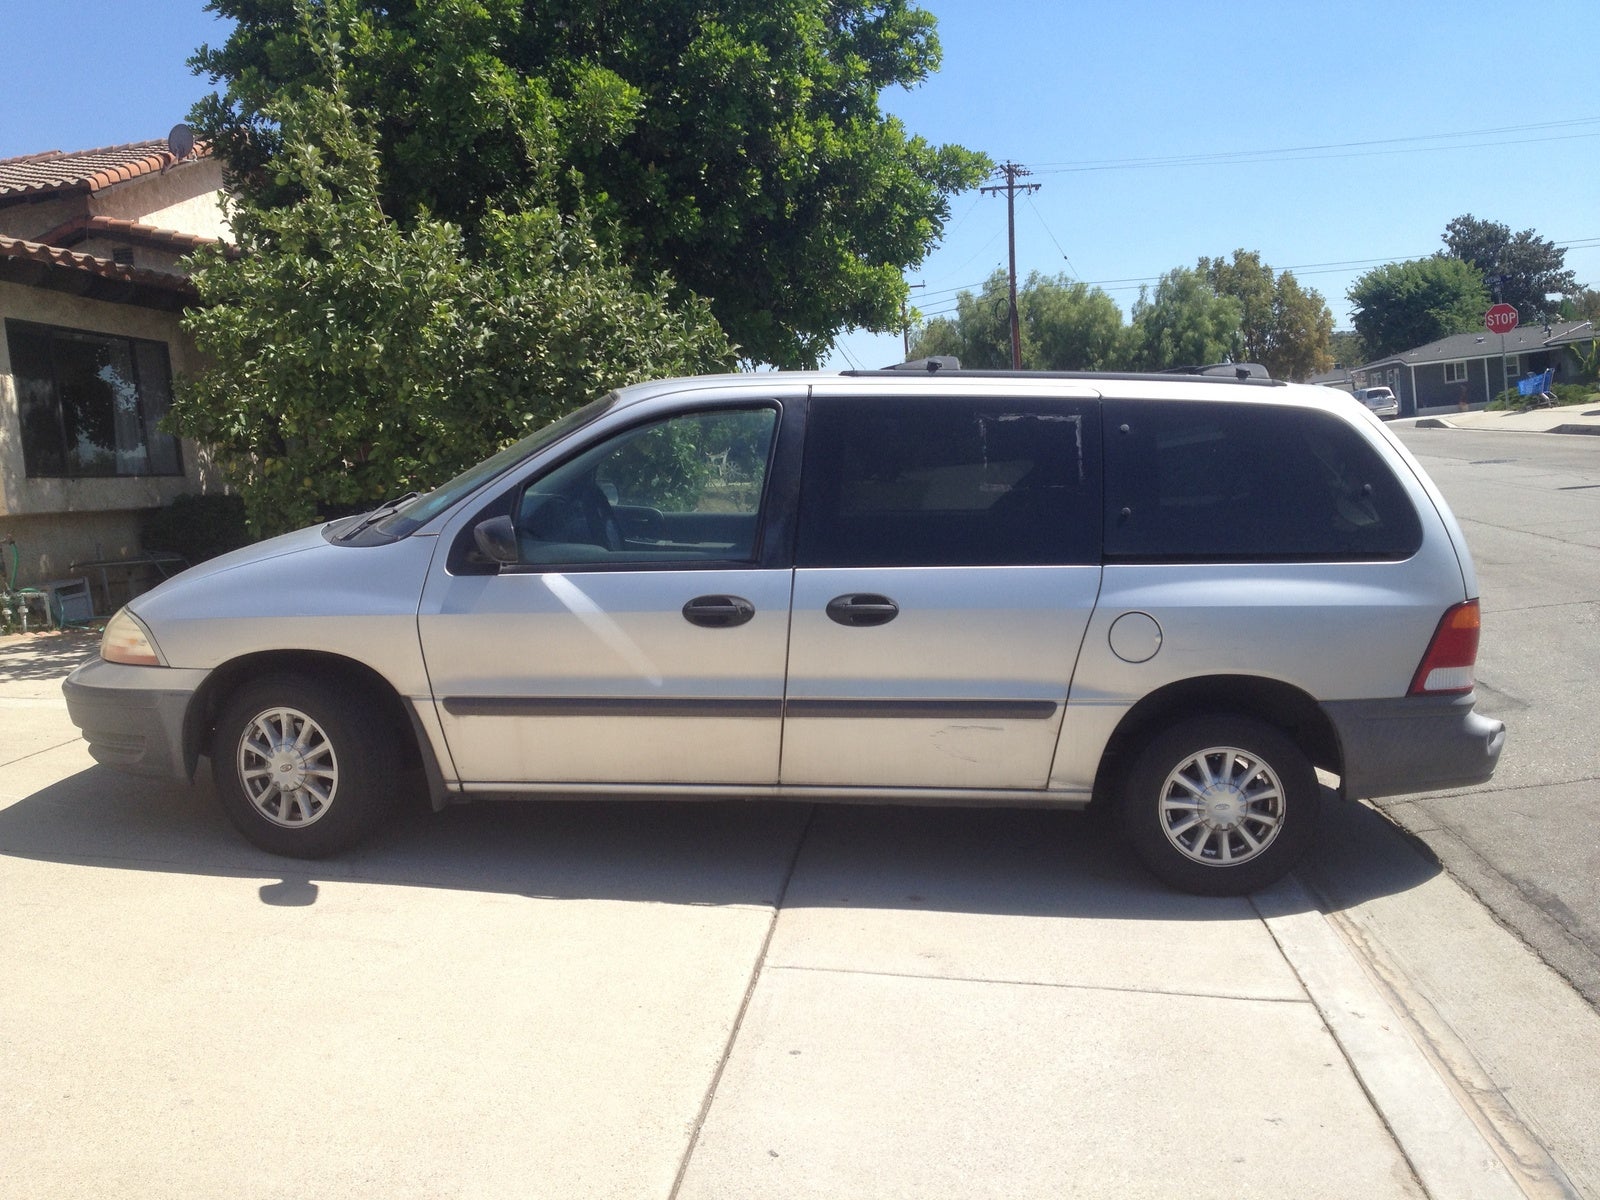 2000 Ford windstar recall 11s16 #2